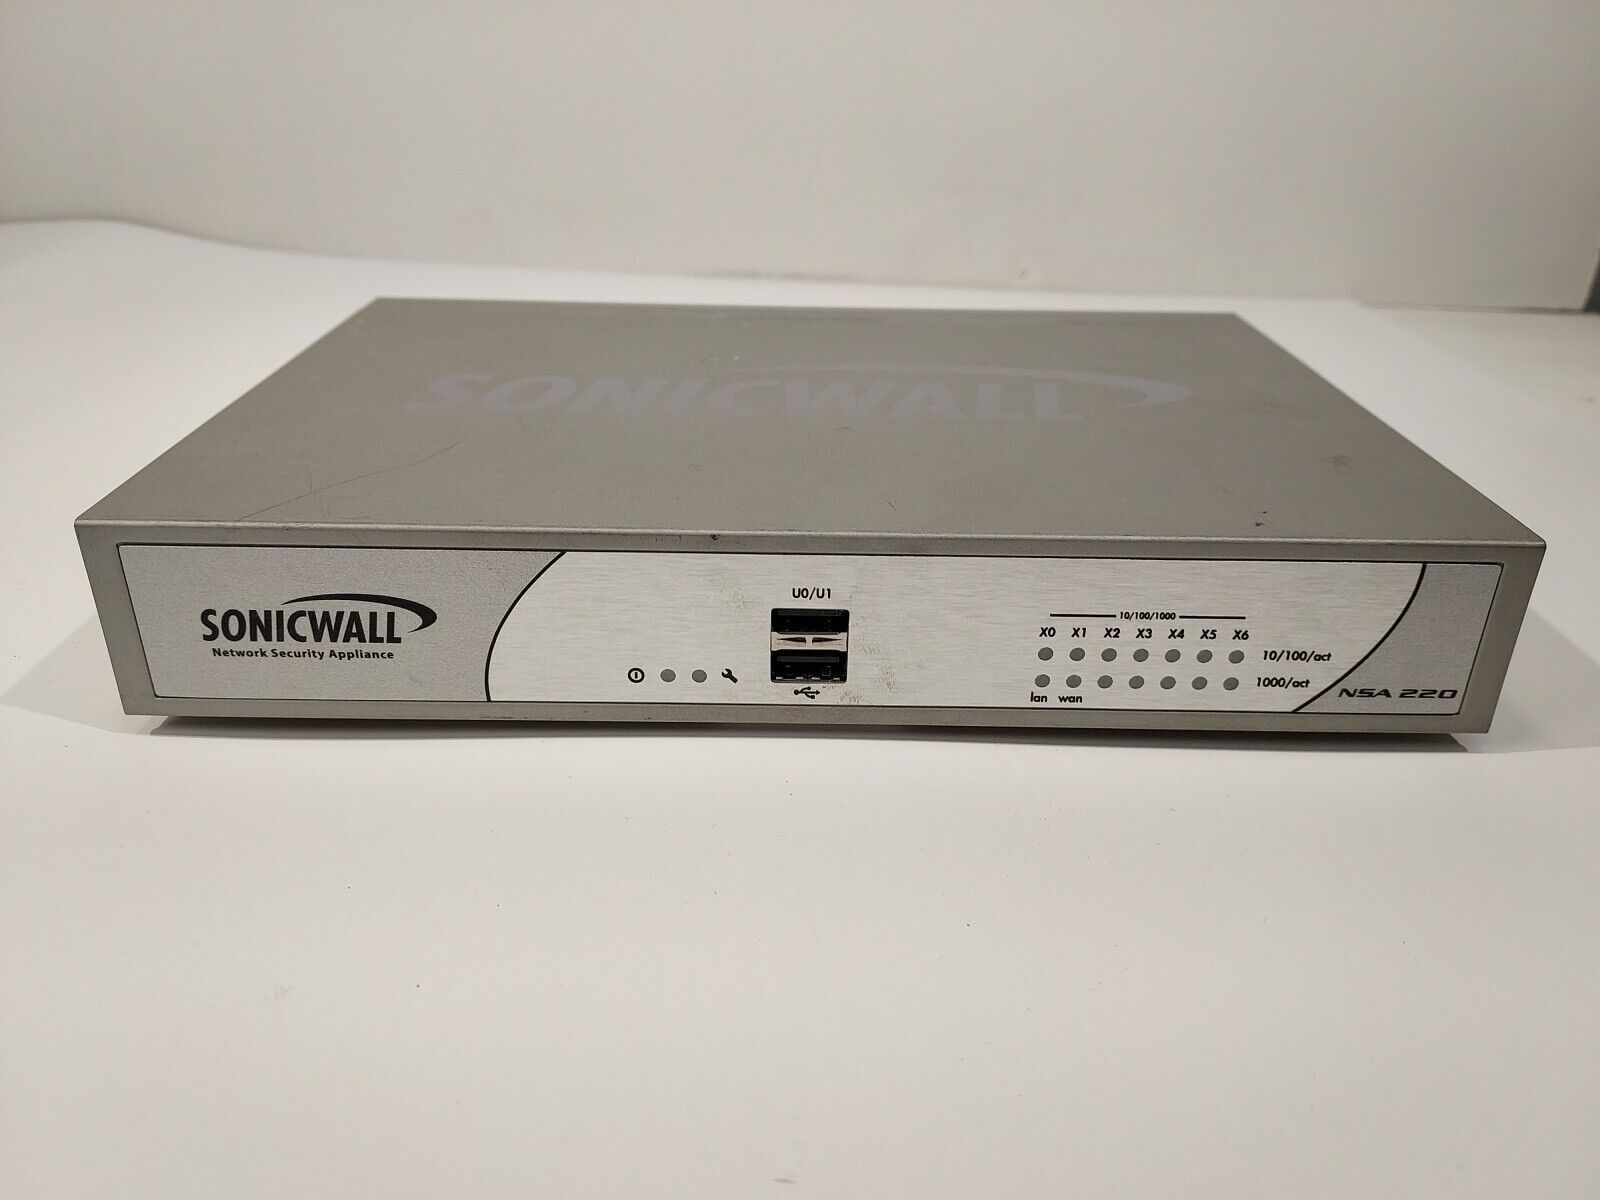 Sonicwall NSA 220 Network Security / Firewall (APL24-08E) No Cords, Console Only